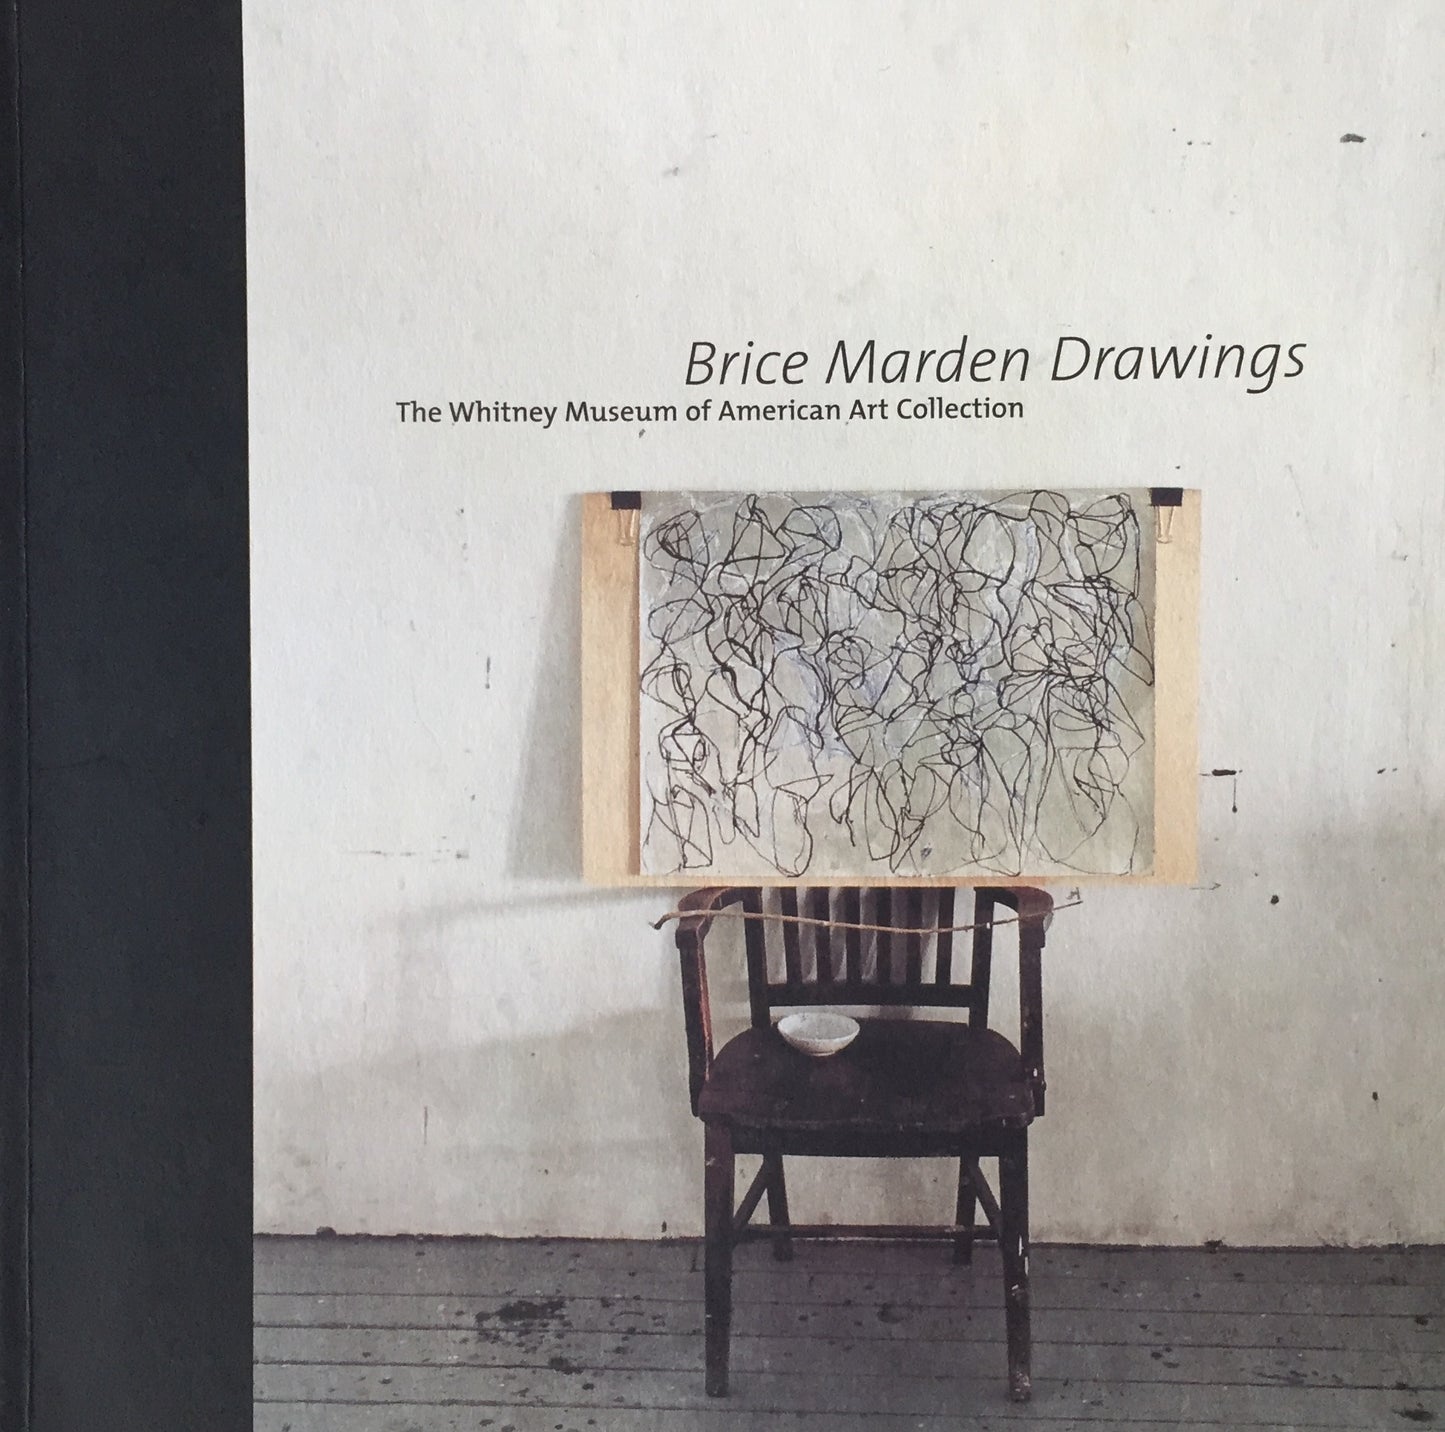 Brice Marden Drawings　The Whitney Museum of American Art Collection　ブライス・マーデン